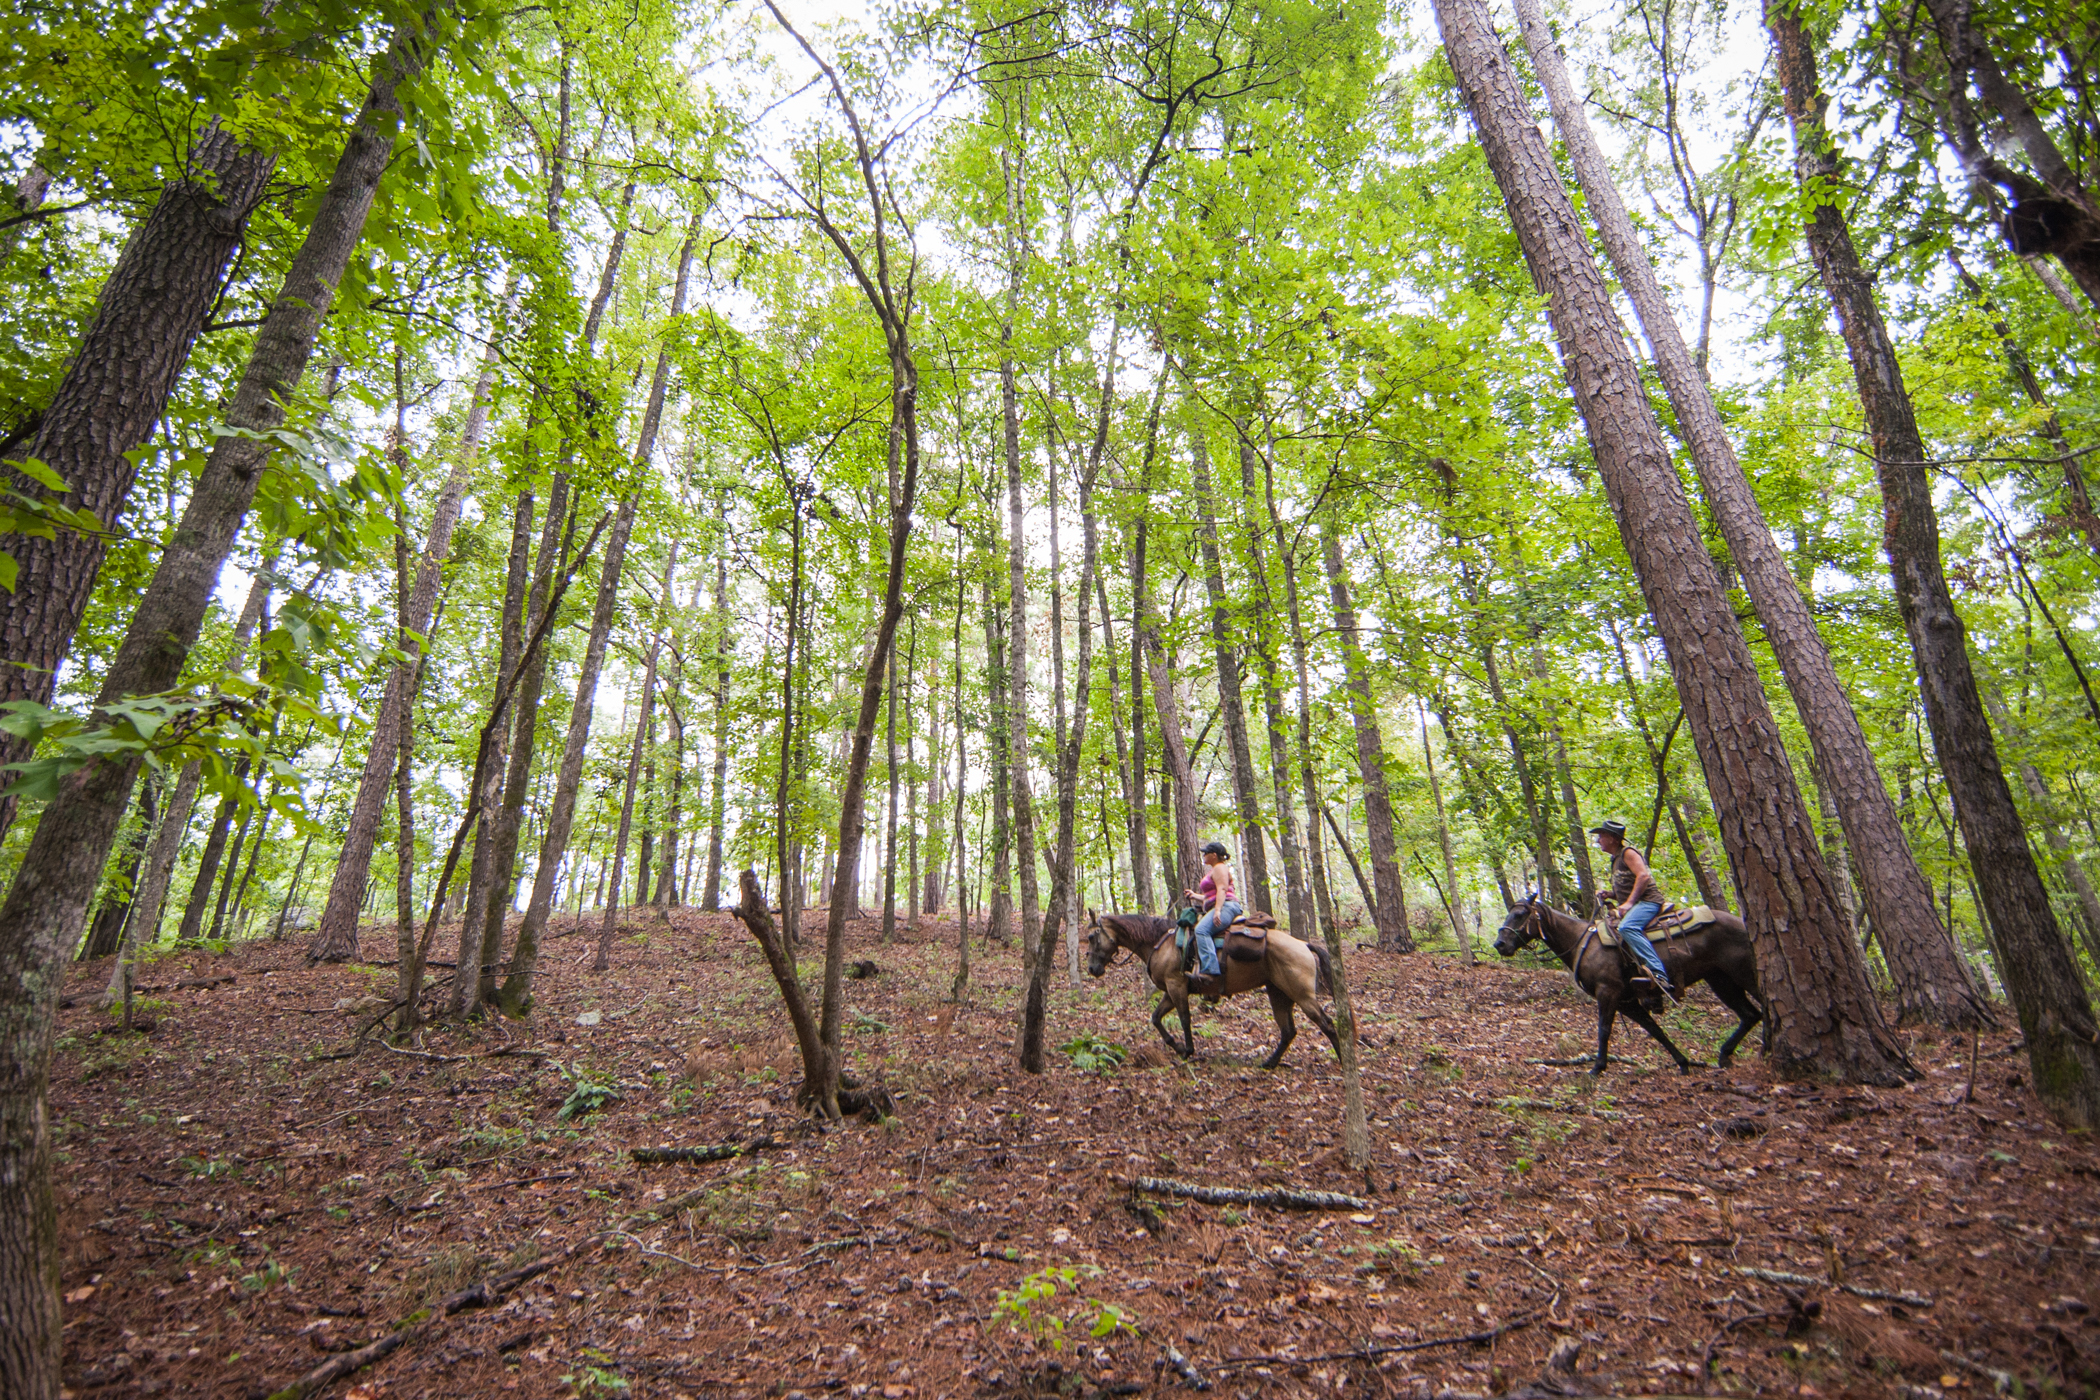 Governor Ivey Awards $1.64 Million to Enhance Outdoor Recreation in Alabama